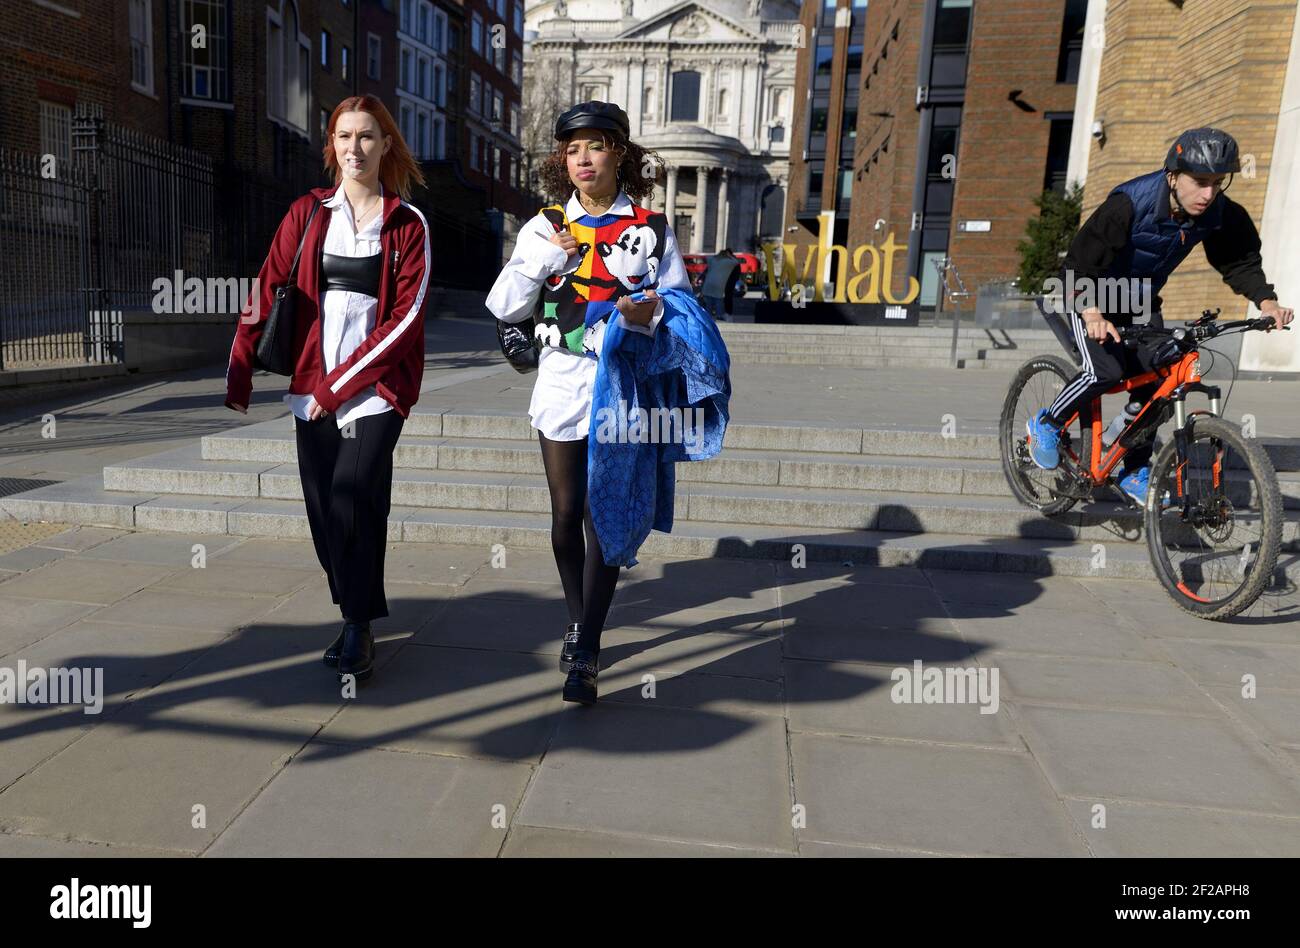 London, England, UK. Young women in St Peter's Hill in the City of London Stock Photo